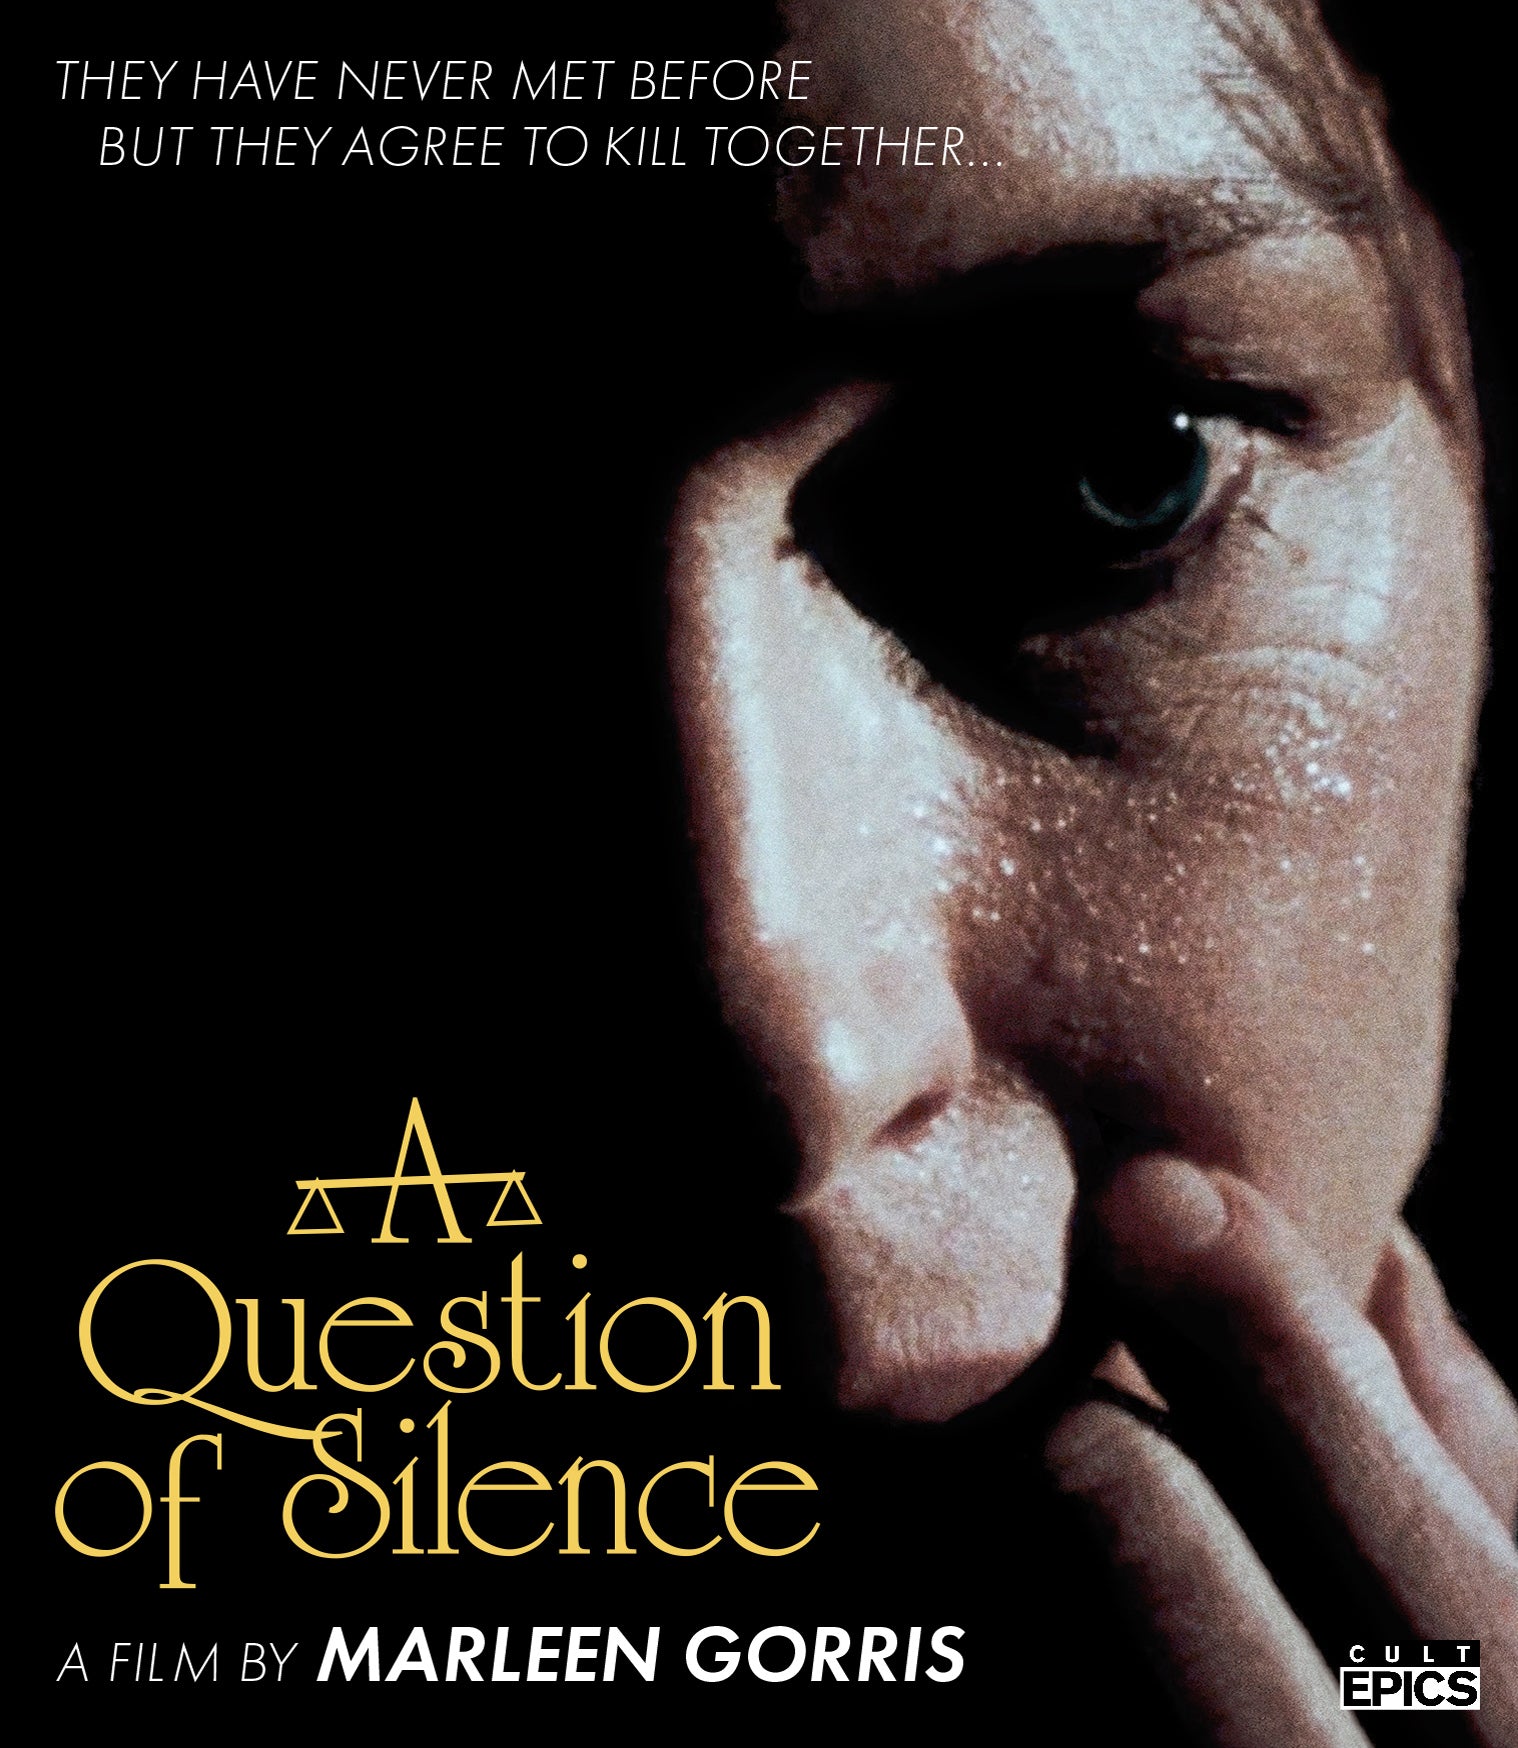 A QUESTION OF SILENCE BLU-RAY